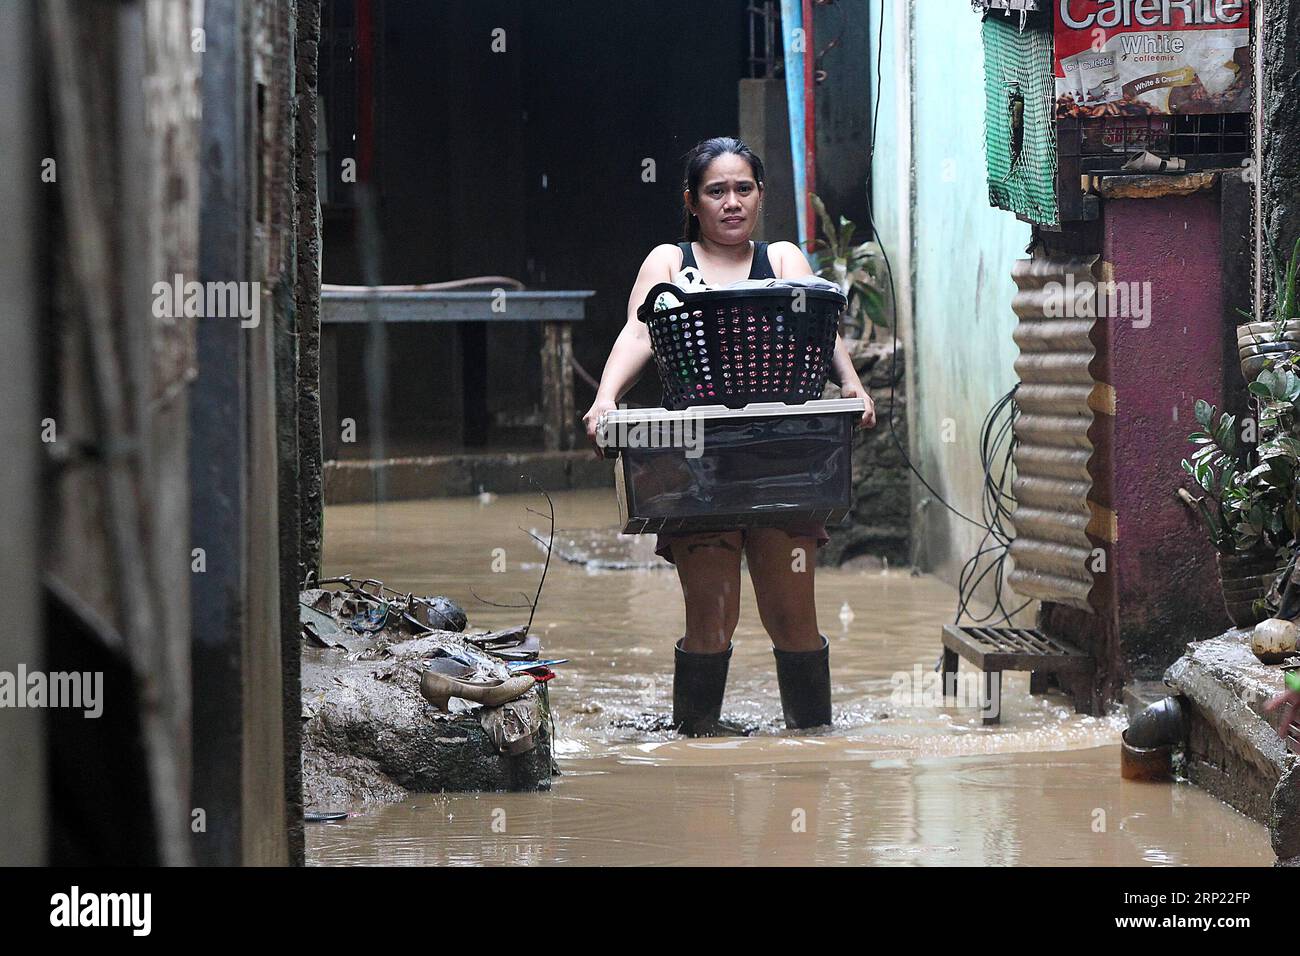 (180813) -- RIZAL, Aug. 13, 2018 -- A woman carries her belongings as she walks through the mud and flood in Rizal Province, the Philippines, Aug. 13, 2018. Days of torrents of rainfall and flooding battered a widespread area in the Philippines, displacing nearly 383,000 people, a disaster agency said on Sunday. ) (jmmn) PHILIPPINES-RIZAL-FLOOD AFTERMATH RouellexUmali PUBLICATIONxNOTxINxCHN Stock Photo